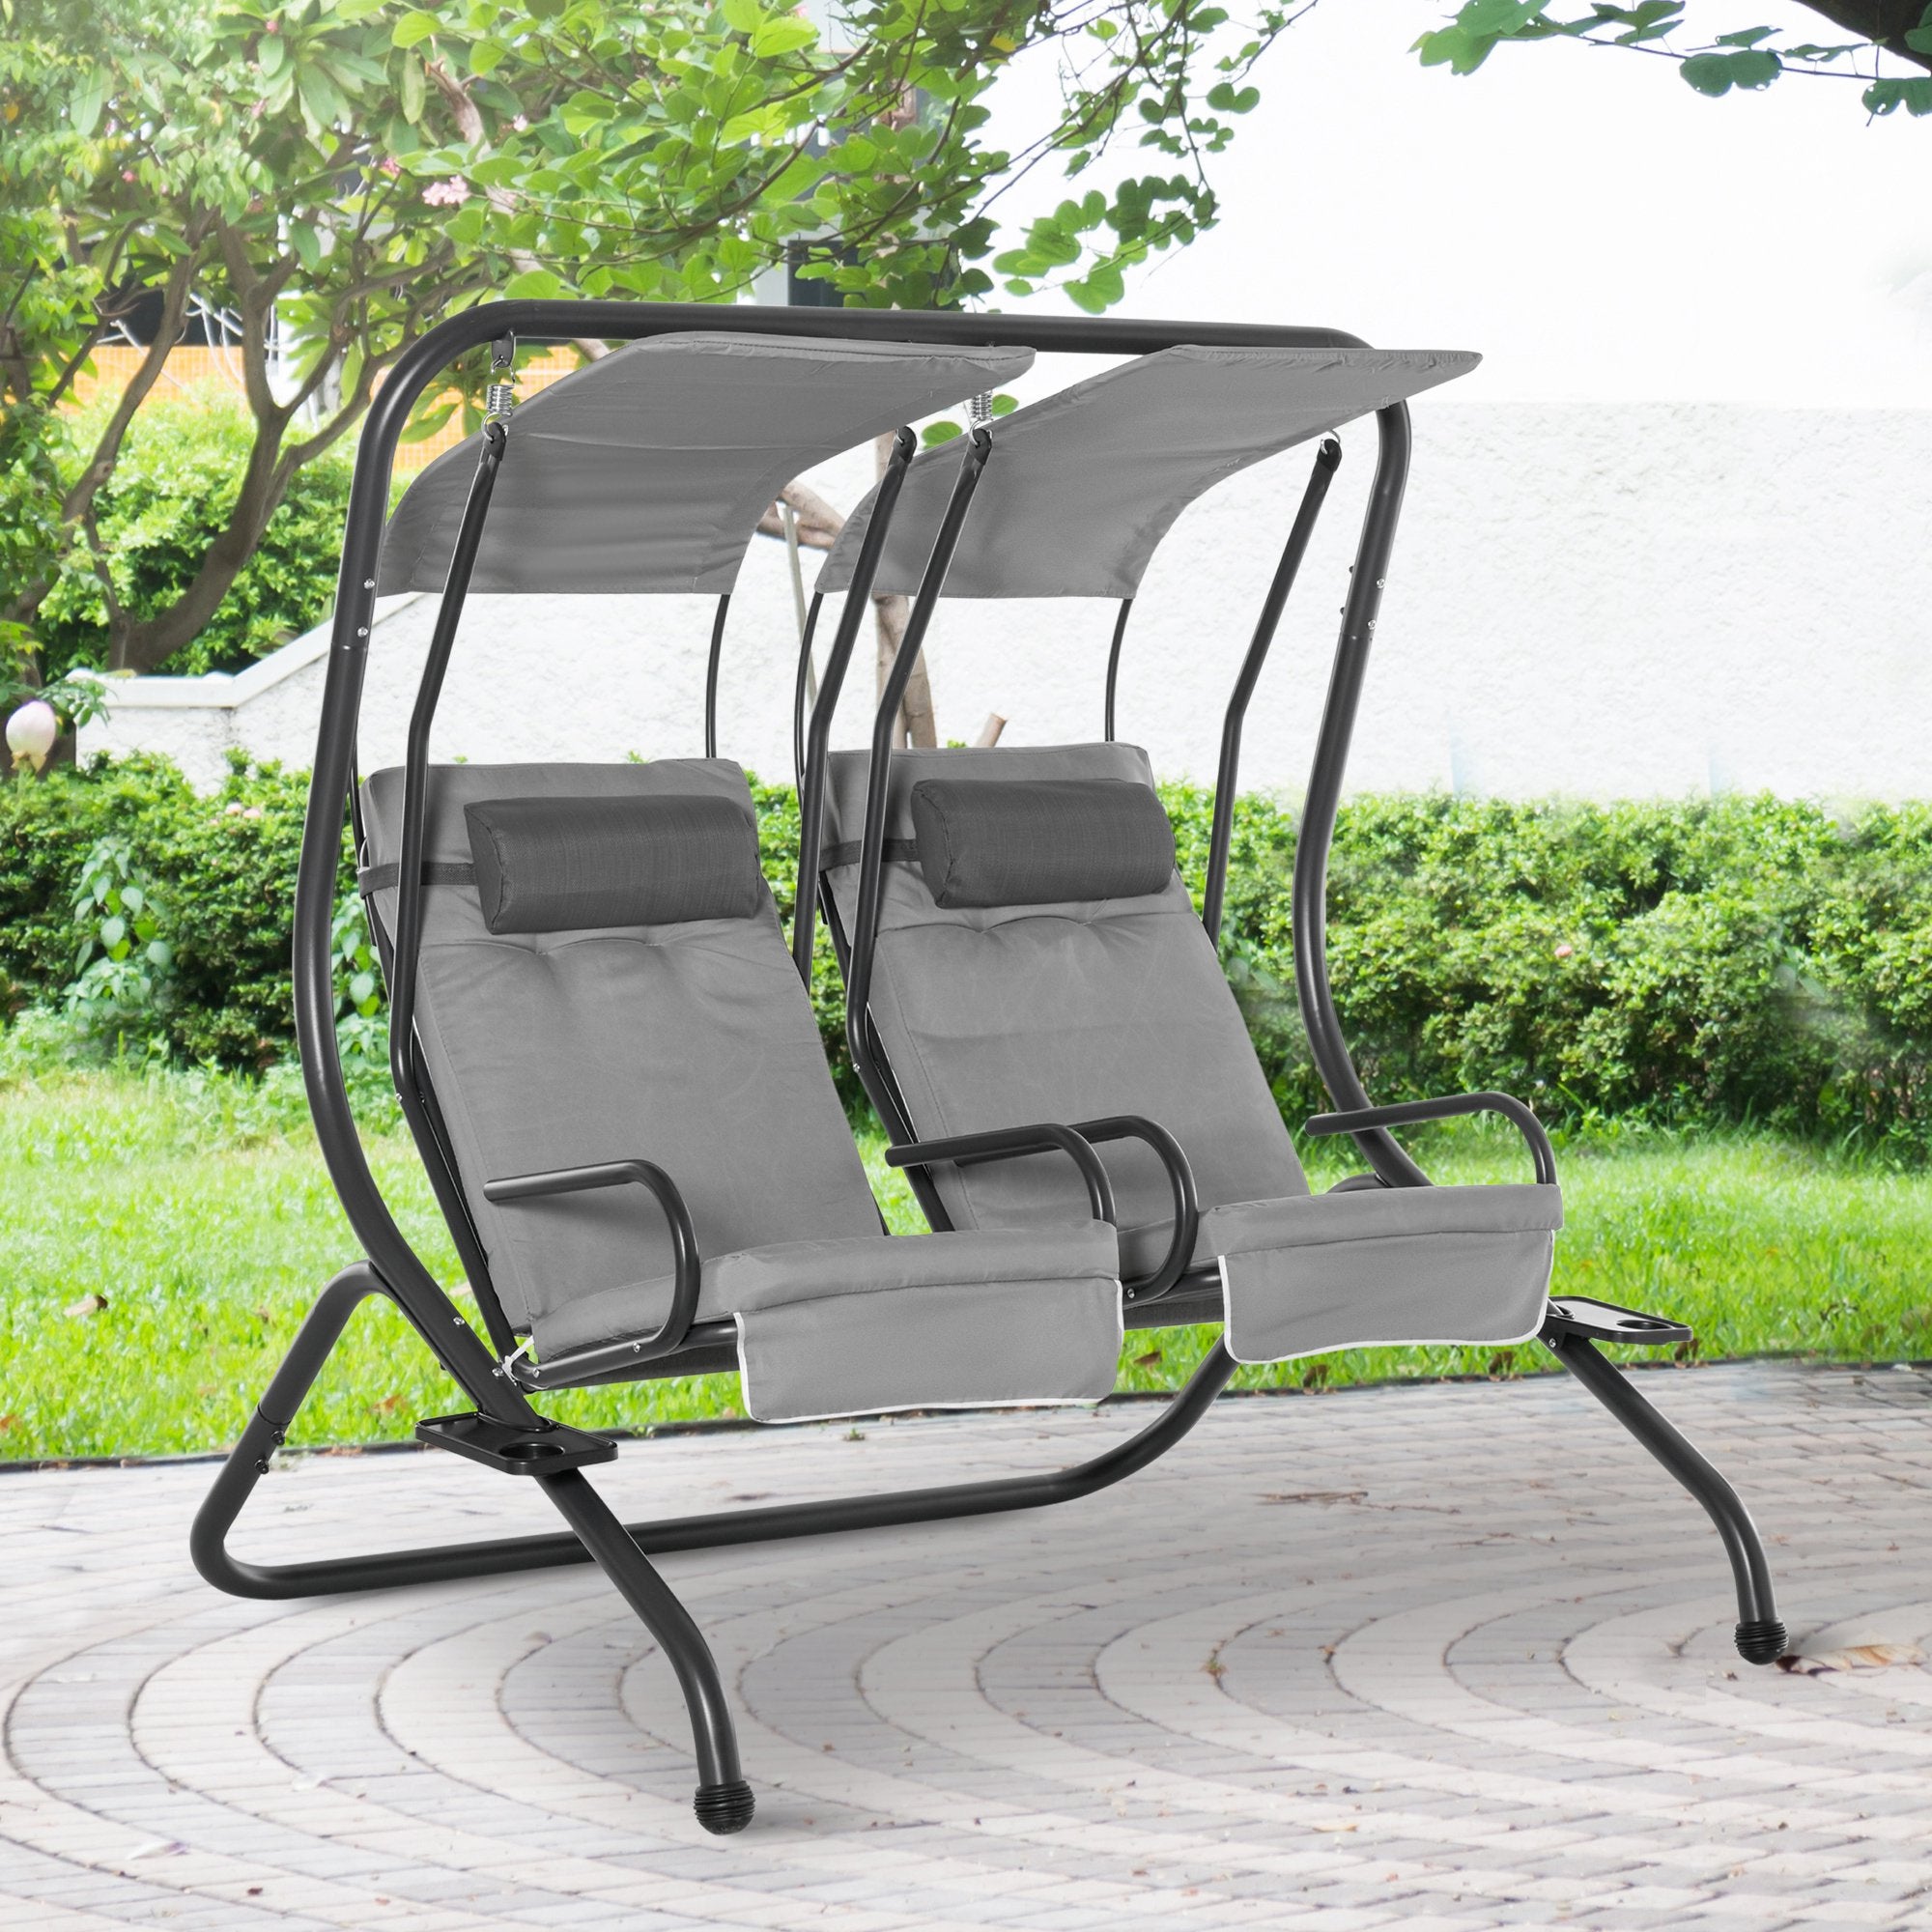 Outsunny Double Seat Swing Chair Modern Garden Swing w/ 2 Separate Relax Chairs, Handrails, Headrests and Removable Canopy, Grey - Inspirely